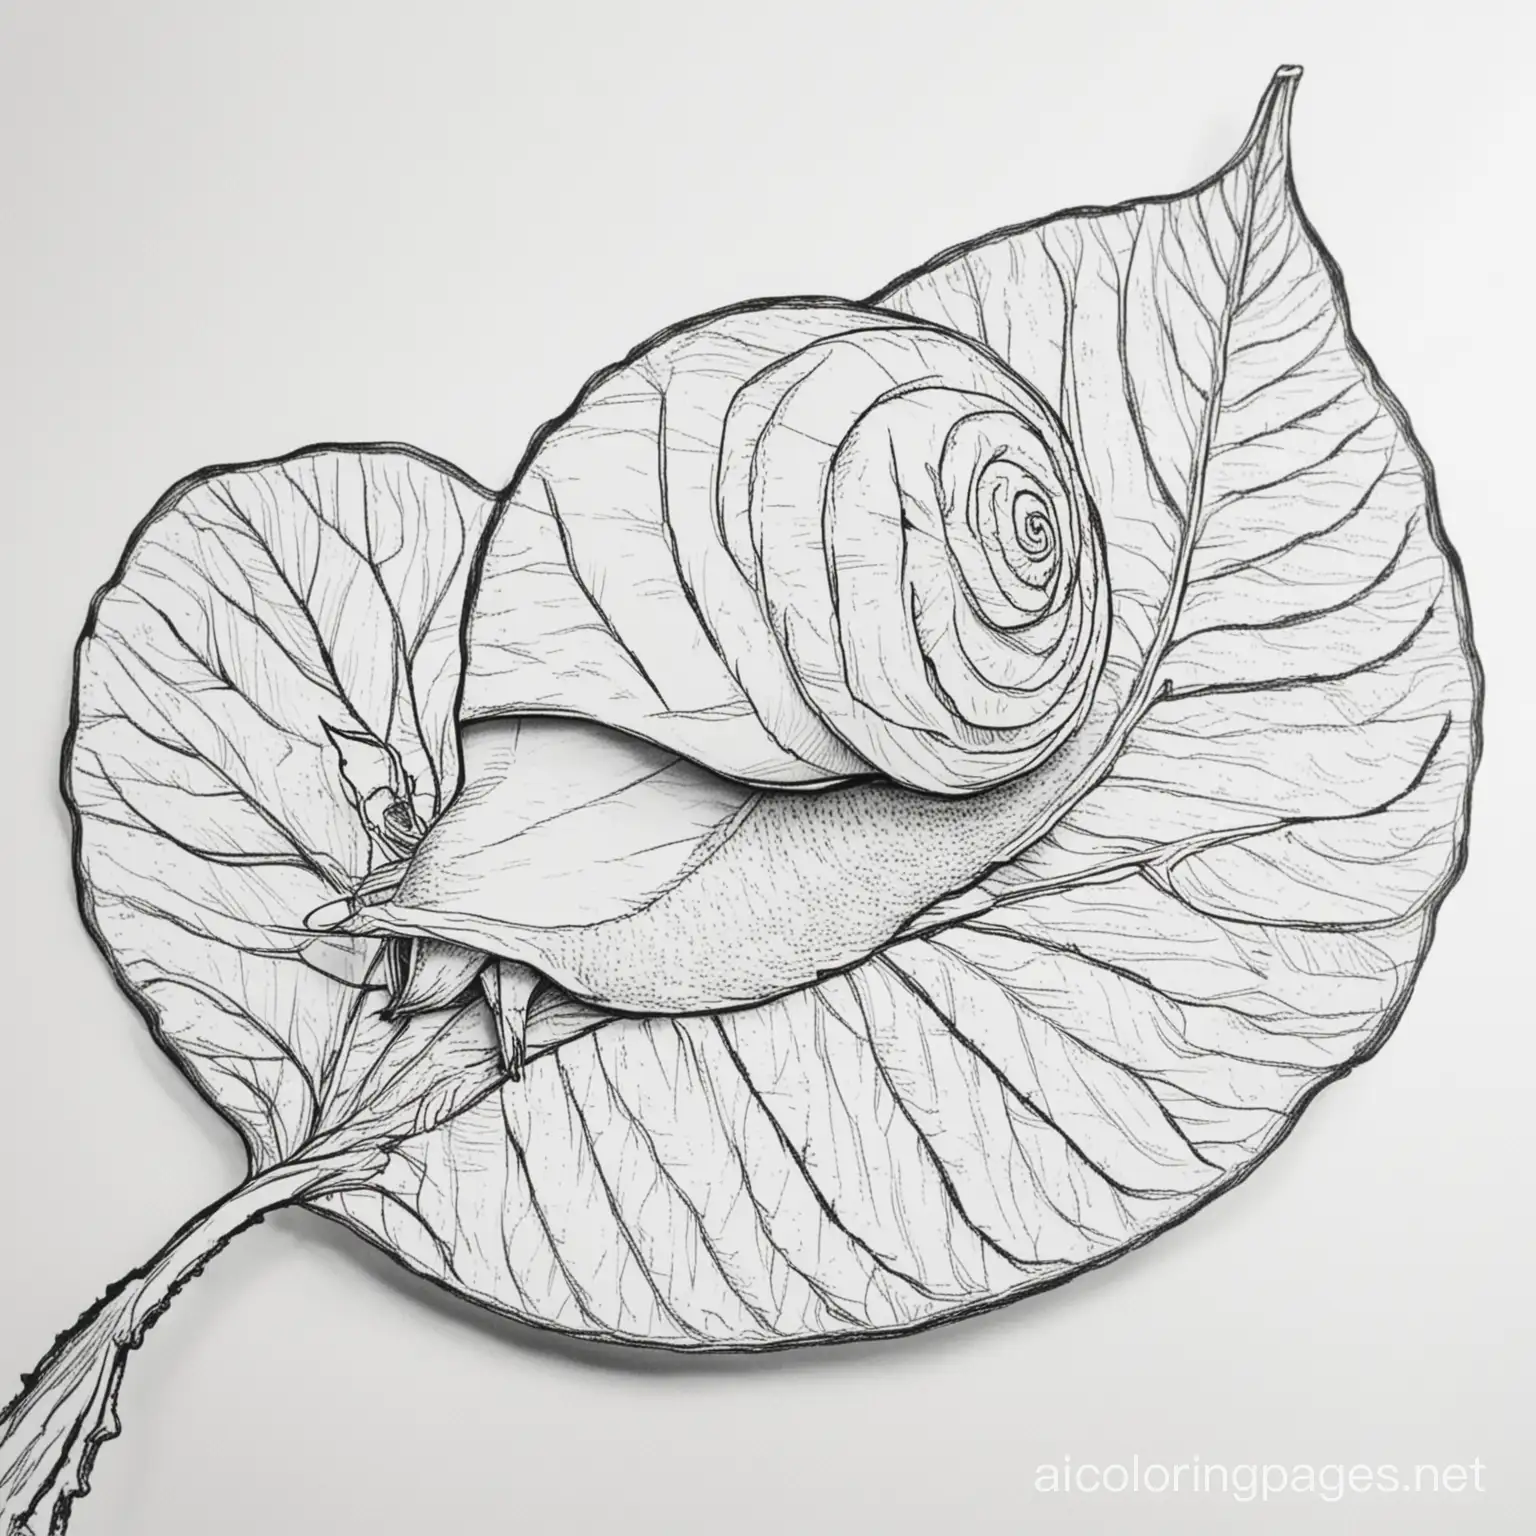 Snail-on-Leaf-Coloring-Page-Simple-Black-and-White-Line-Art-for-Kids